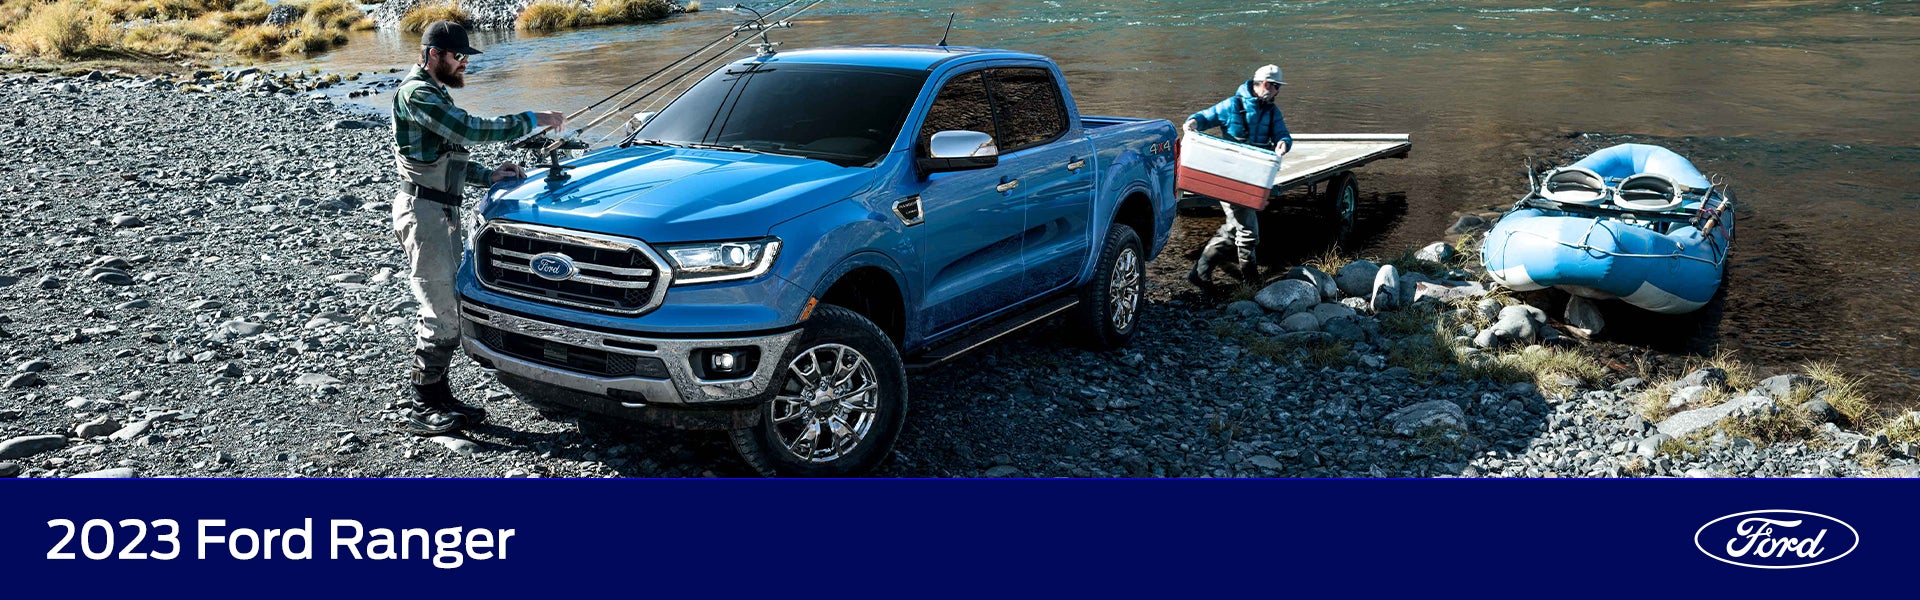 2023 Ford Ranger Jackson Ford, Inc. Decatur IL